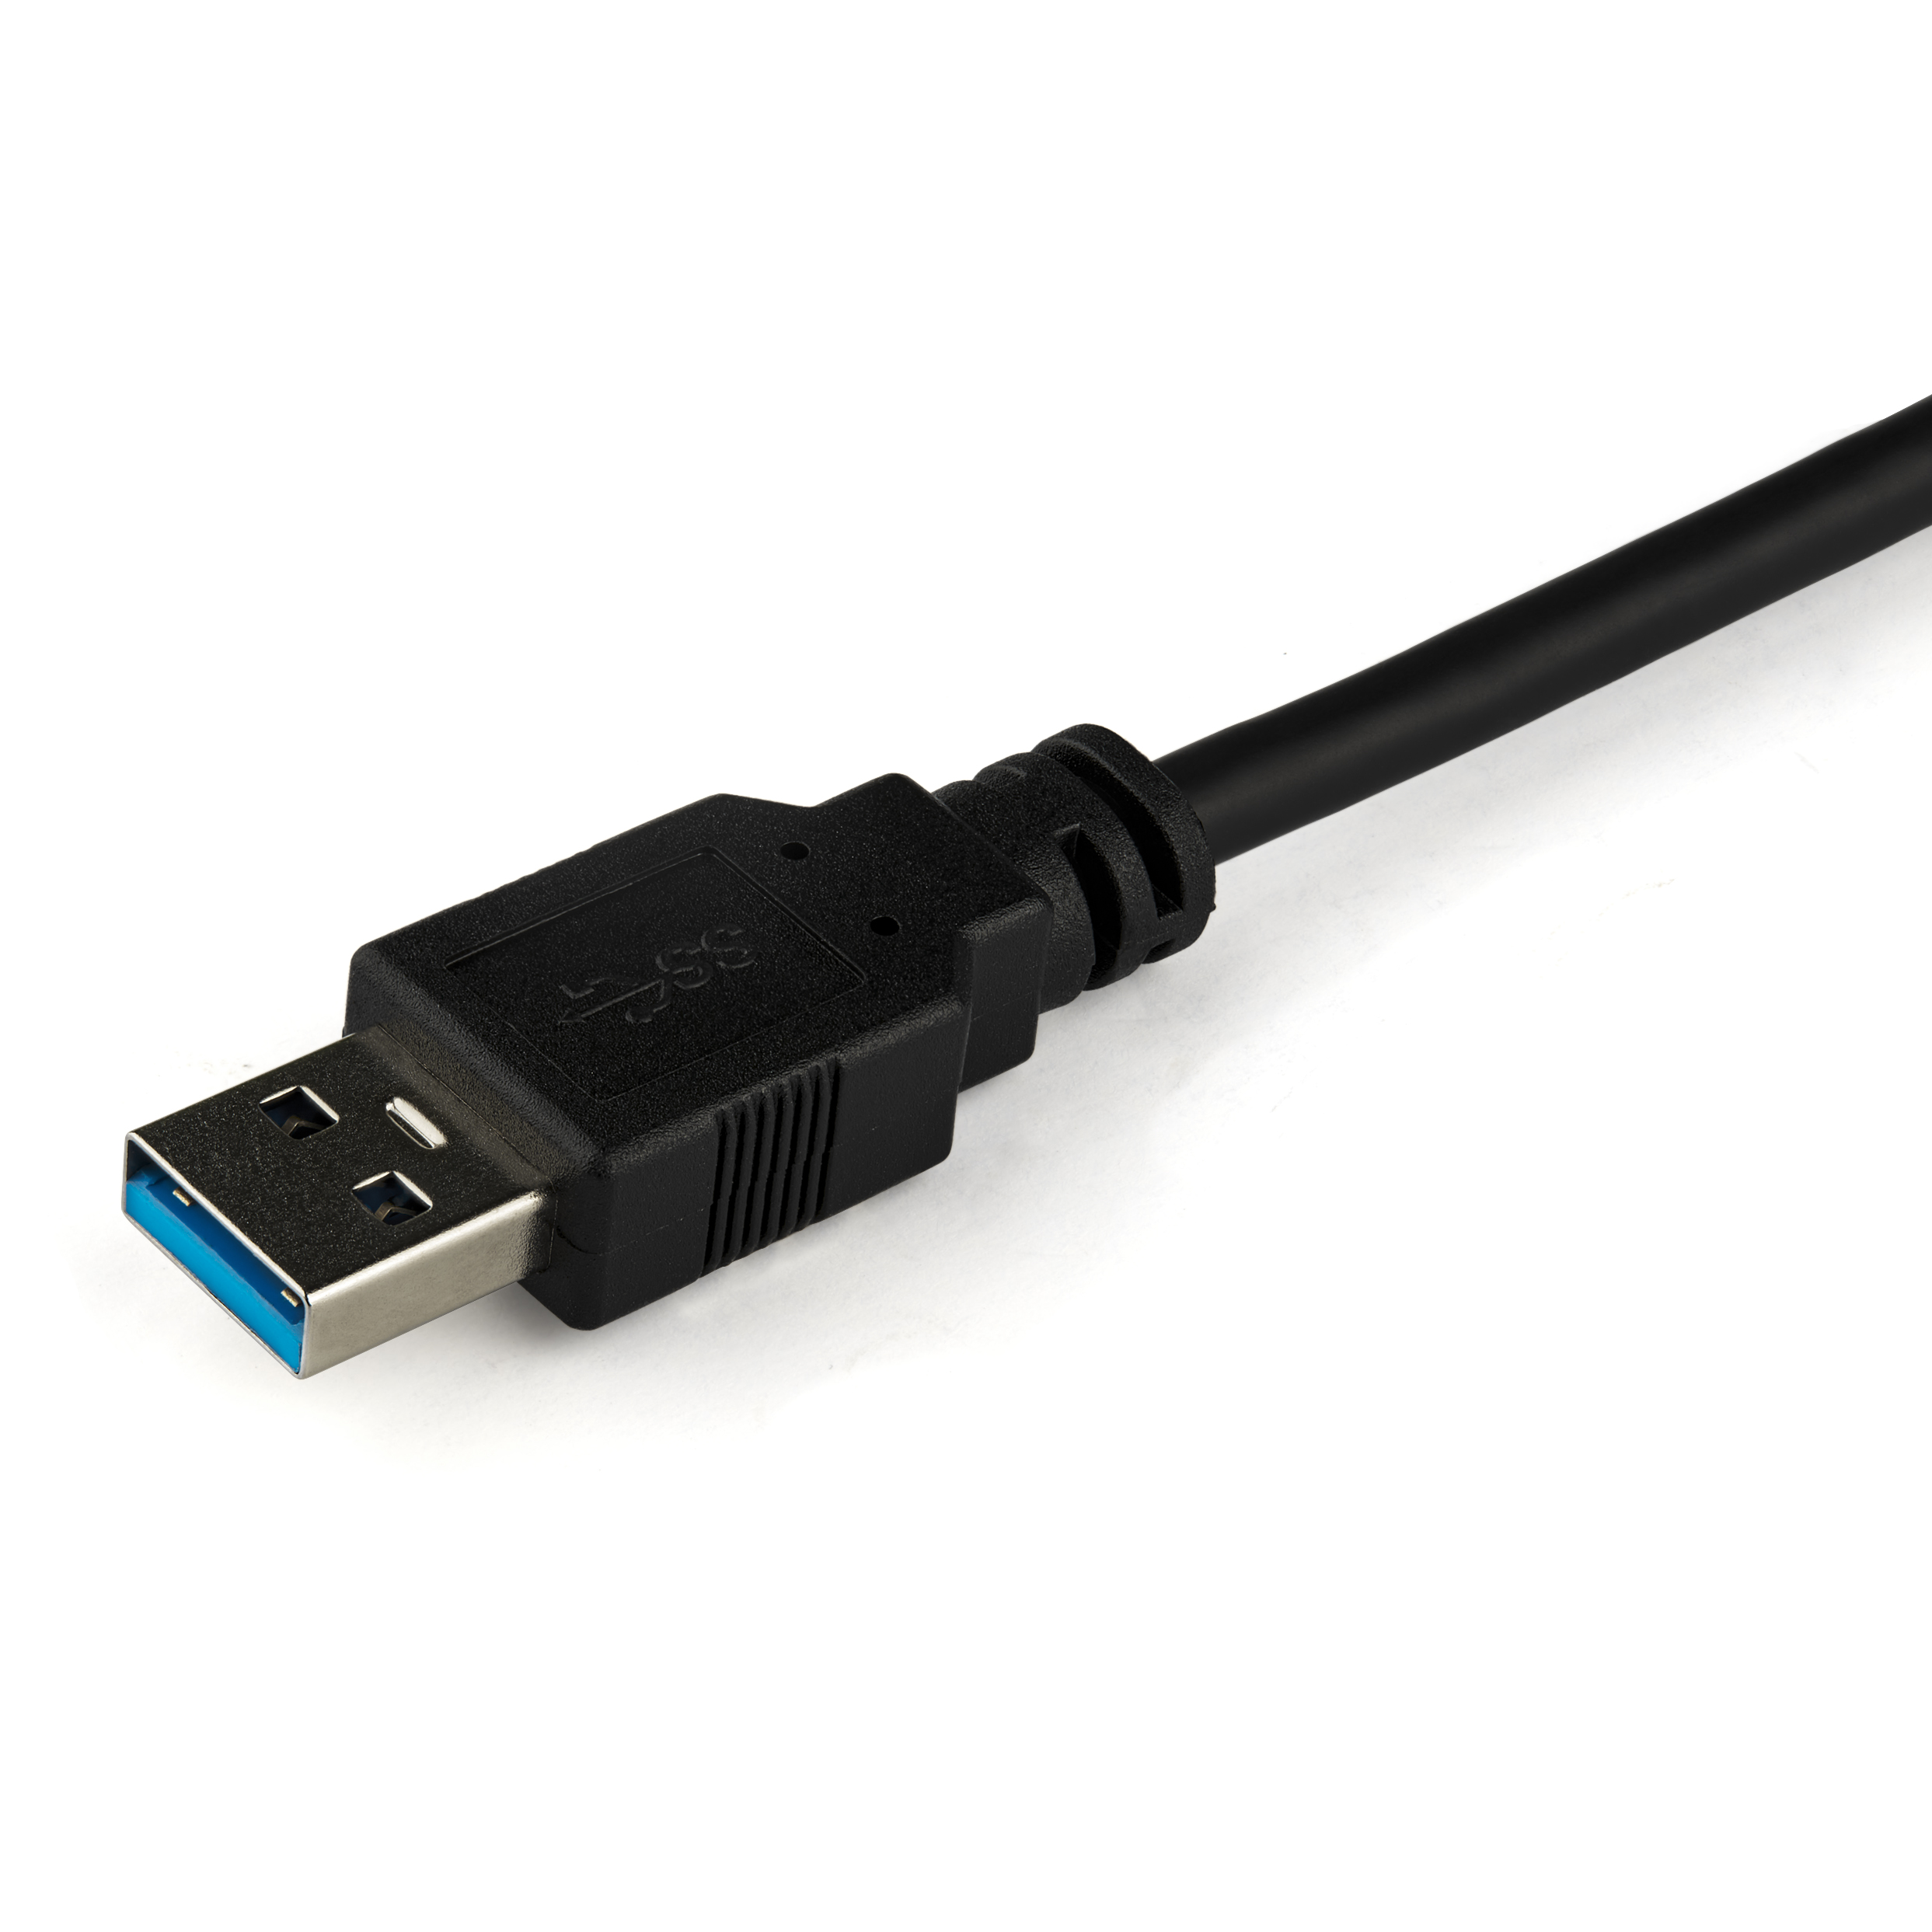 Usb Sata Cable Sata 3 To Usb 3.0 Computer Cable Connector Usb 2 Sata  Adapter Cable Support 2.5 Inch Ssd Hdd Hard Drive From Electronicworldkk,  $17.94